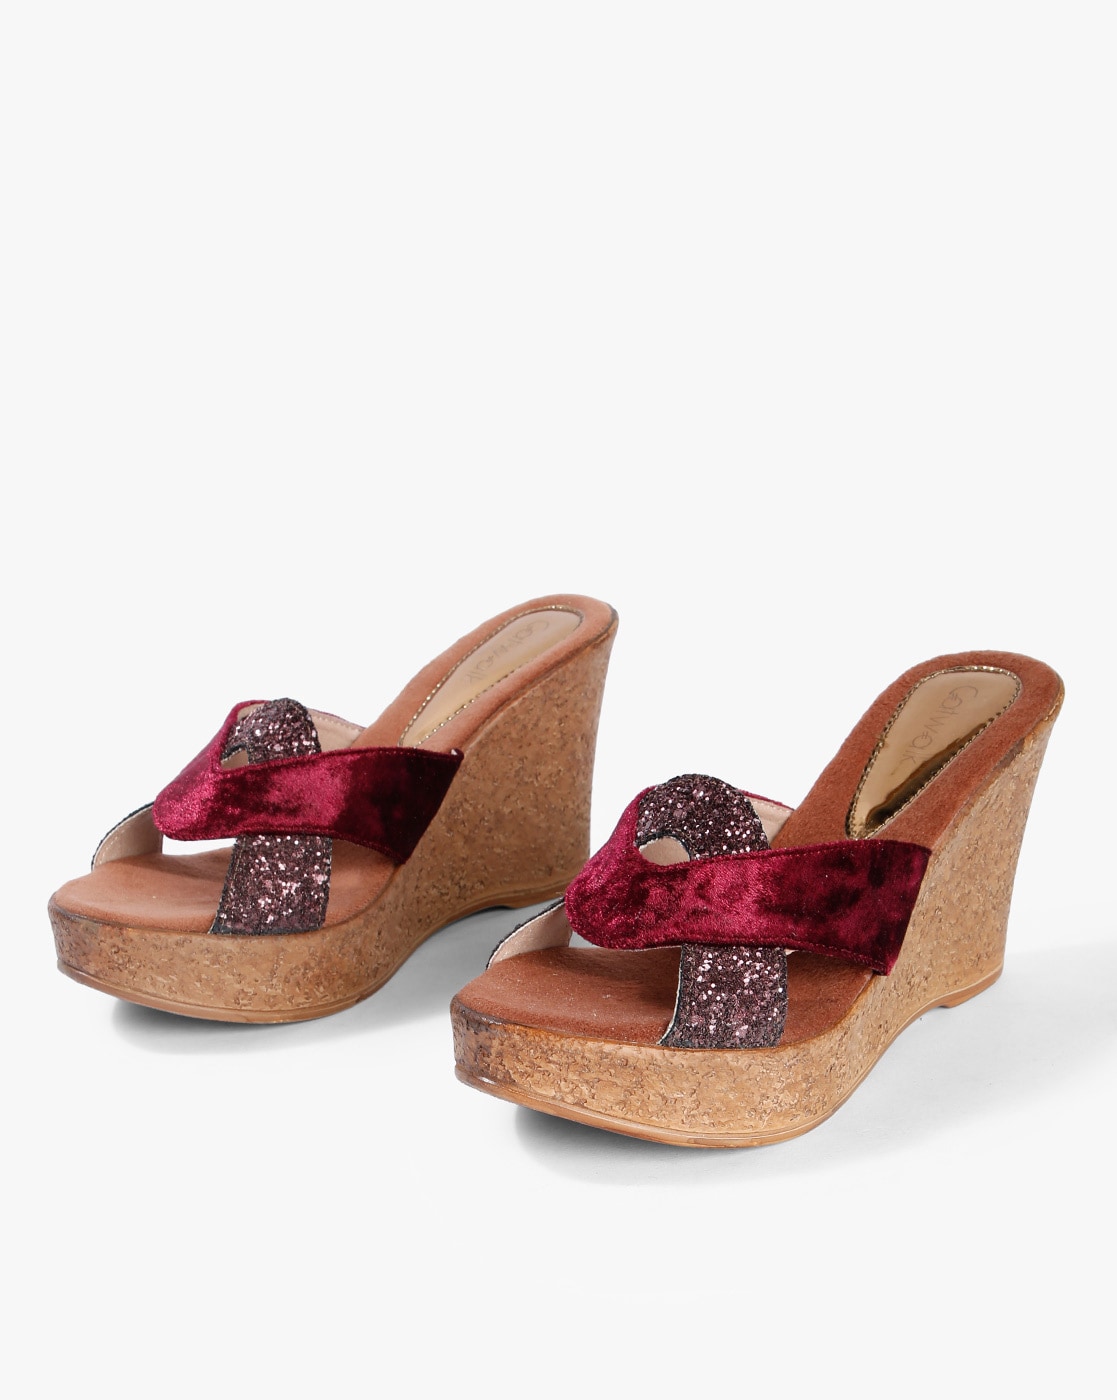 Buy Maroon Heeled Sandals for Women by 